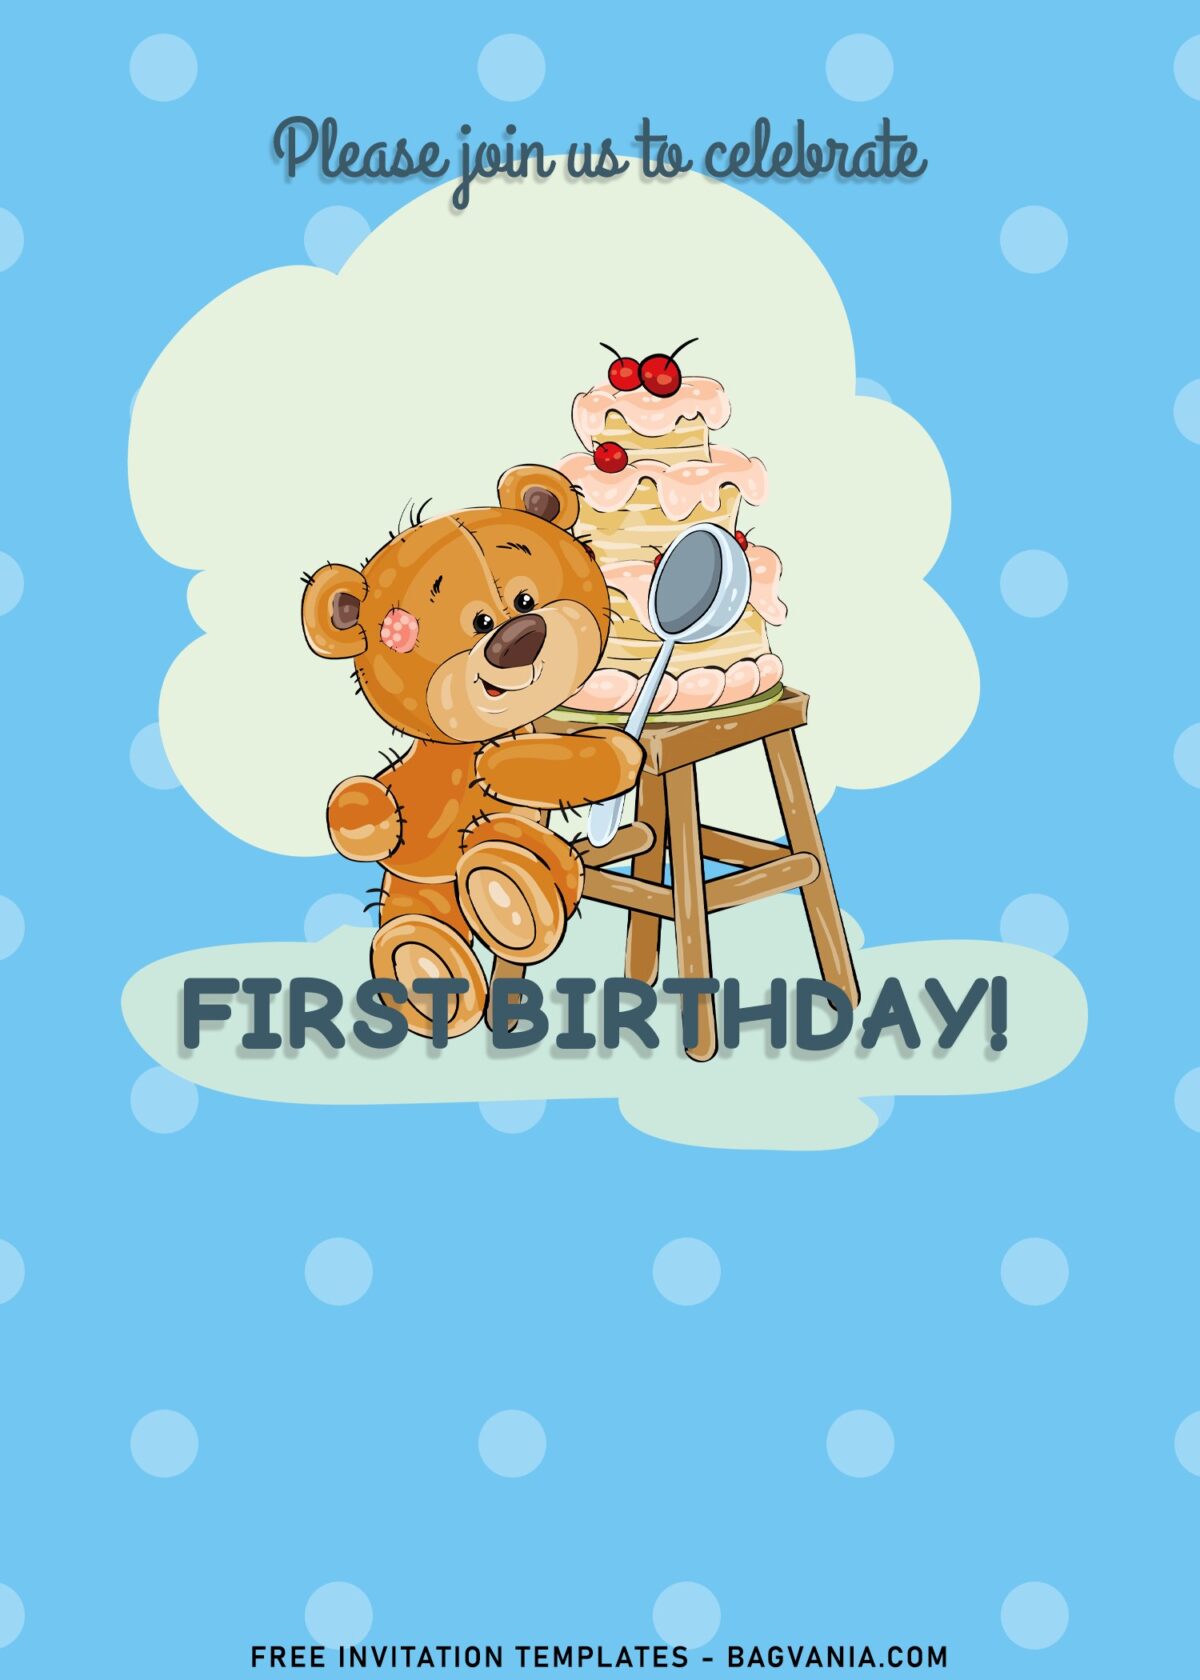 10+ Lovable Watercolor Teddy Bear Birthday Invitation Templates with cute teddy bear is scooping out the his birthdaycake